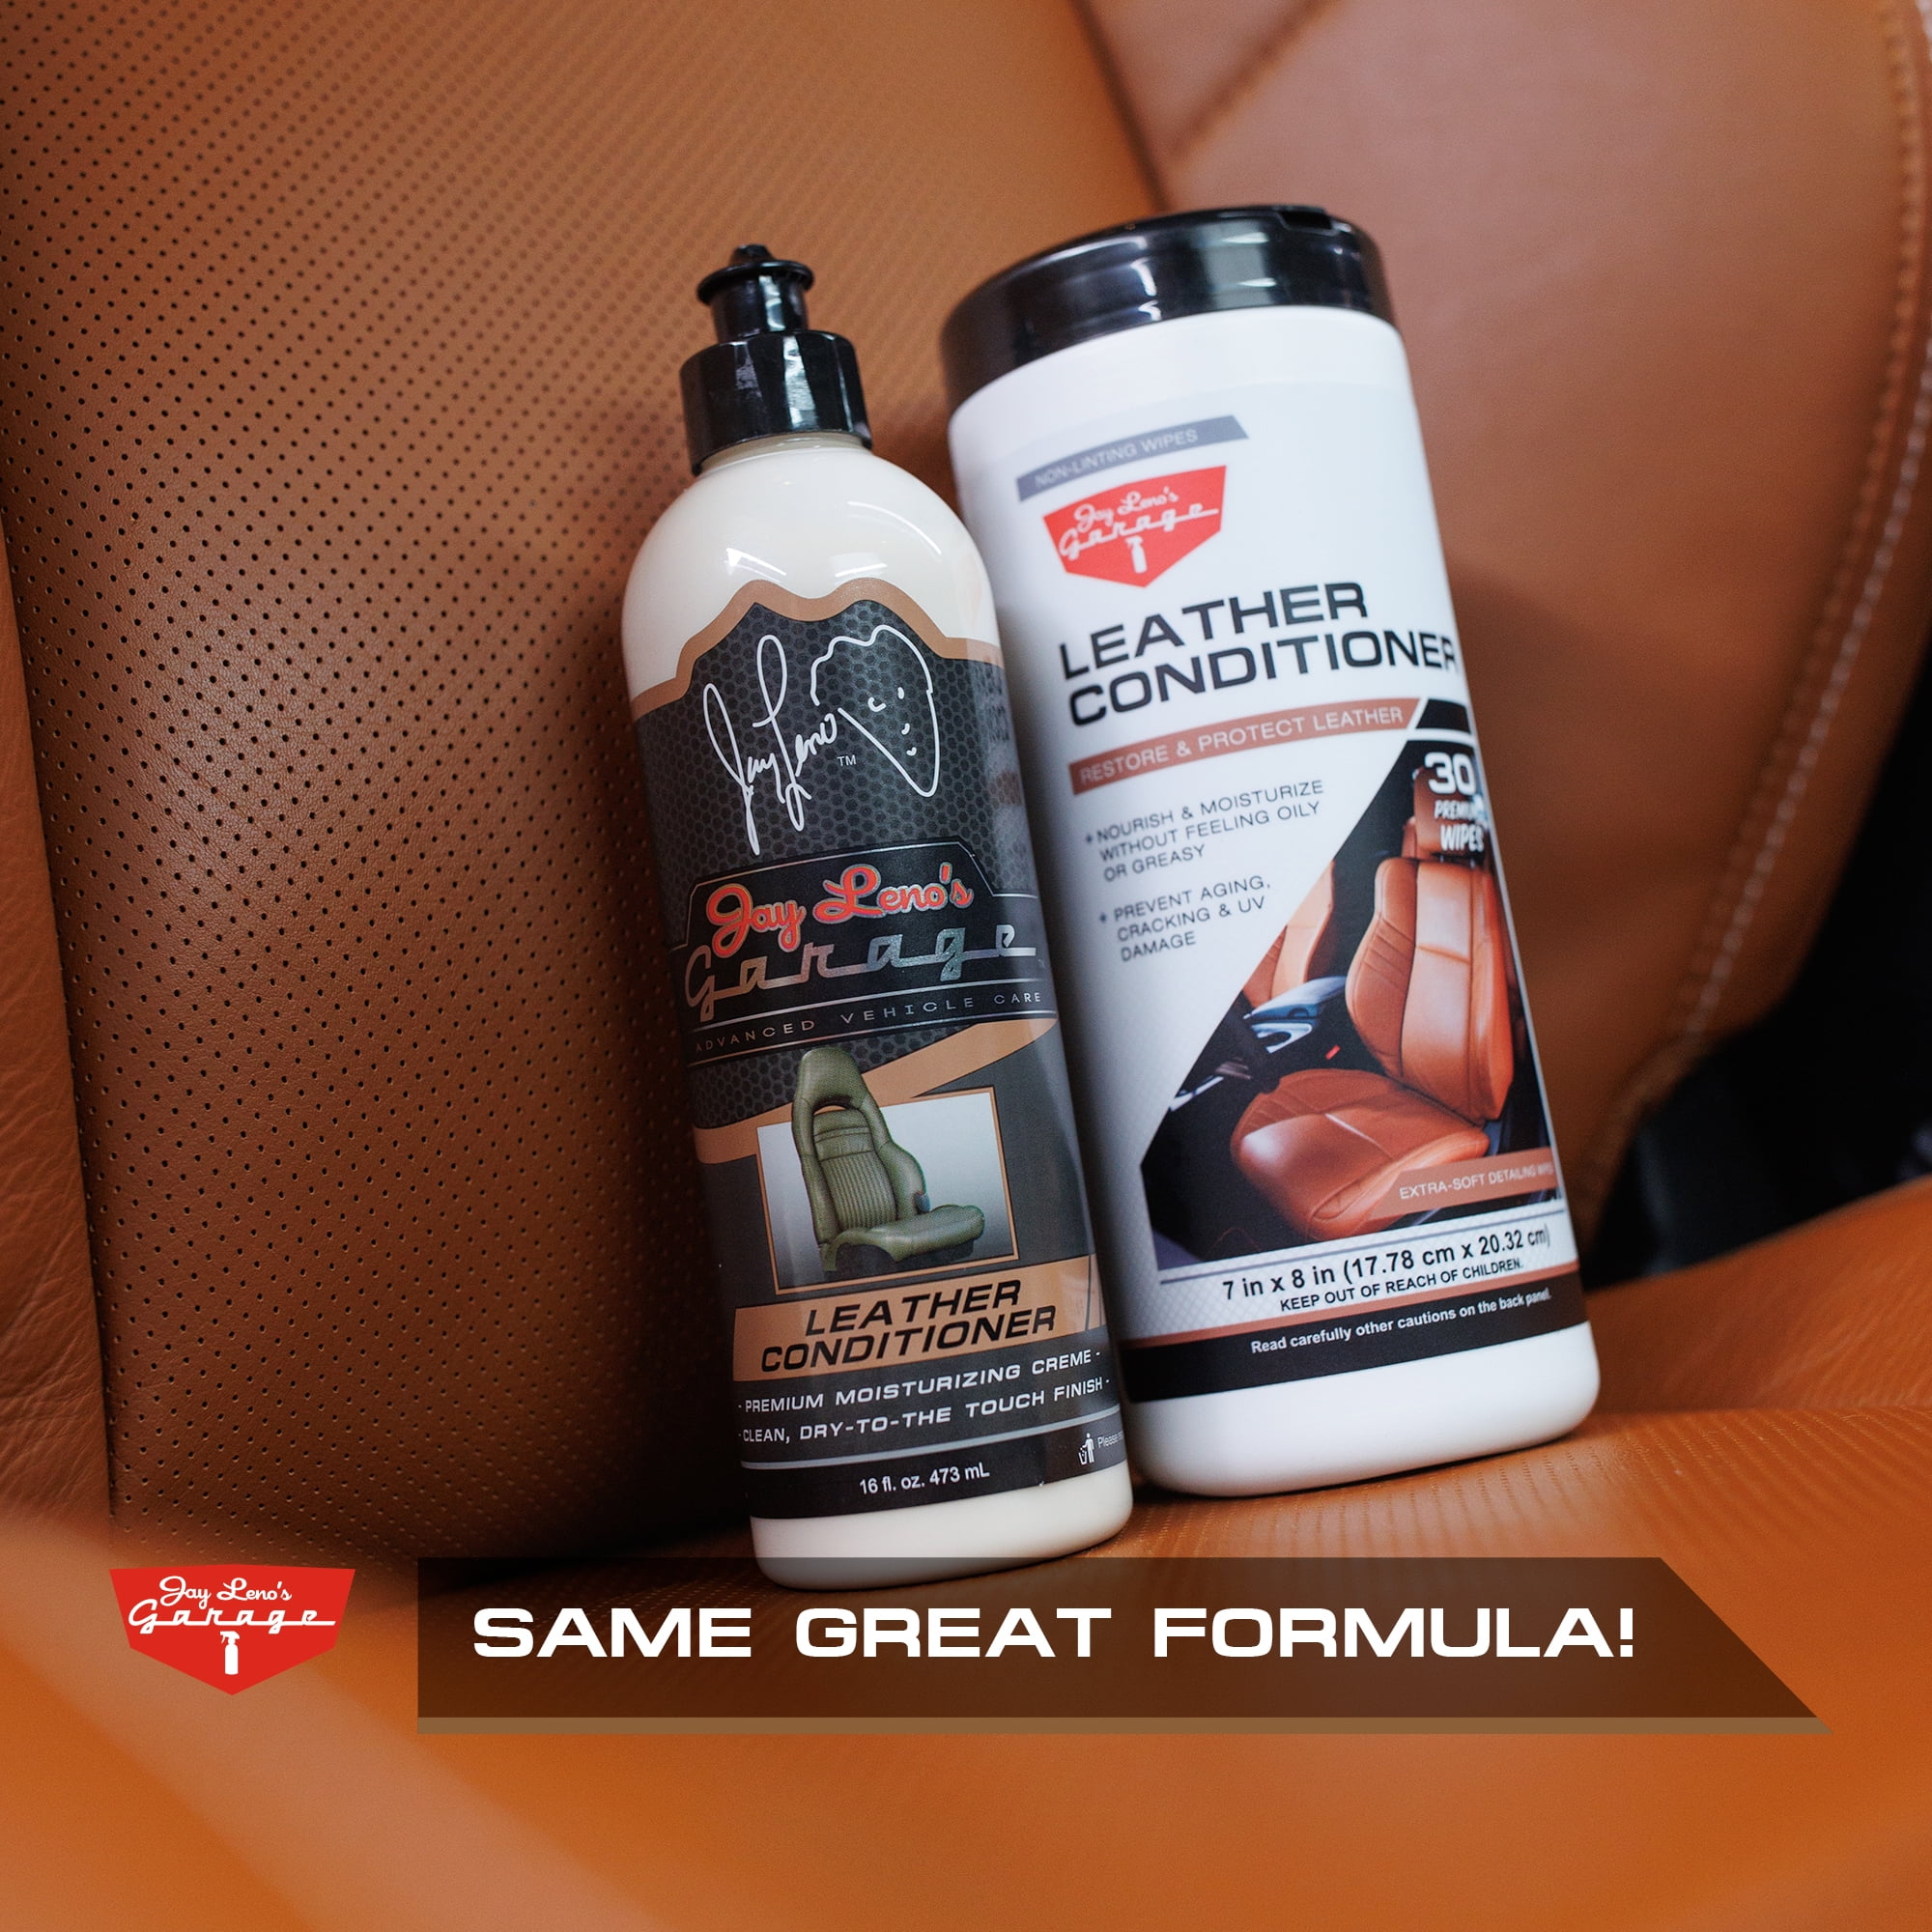 Leather Cleaning  Leather Cleaner Wipes from Jay Leno's Garage